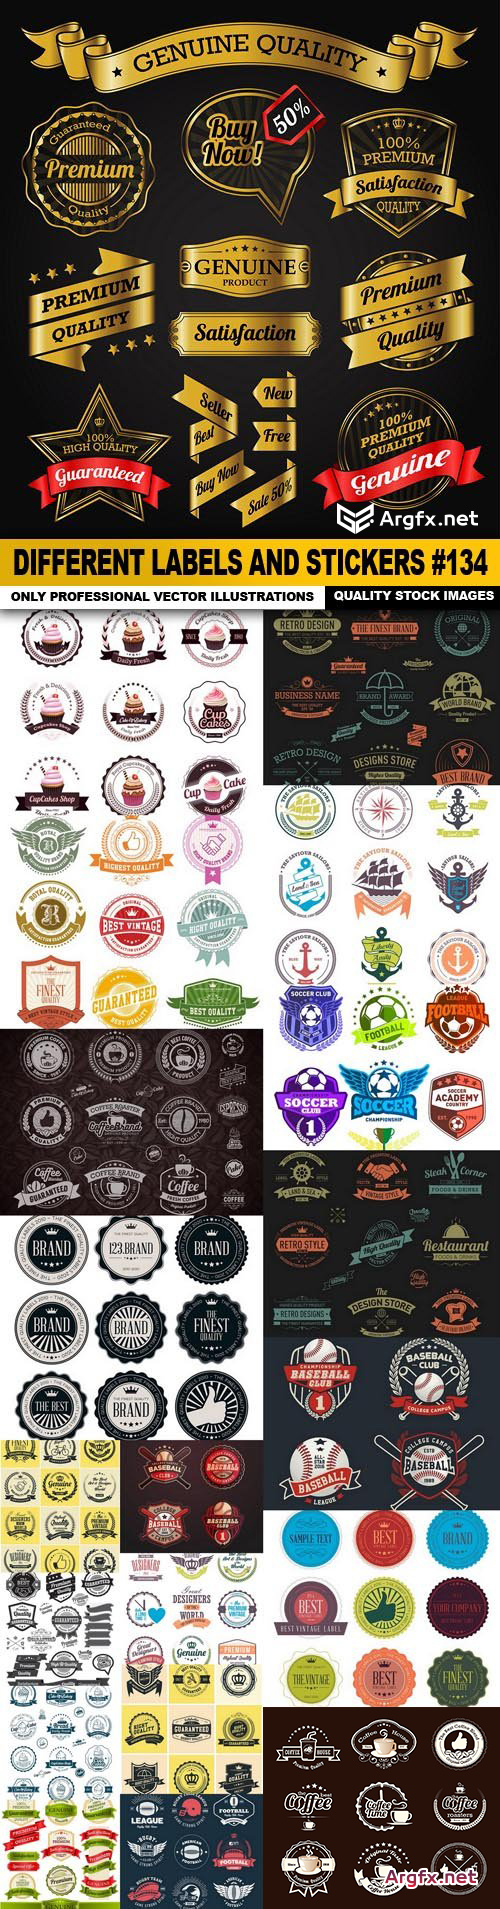  Different Labels And Stickers #134 - 20 Vector